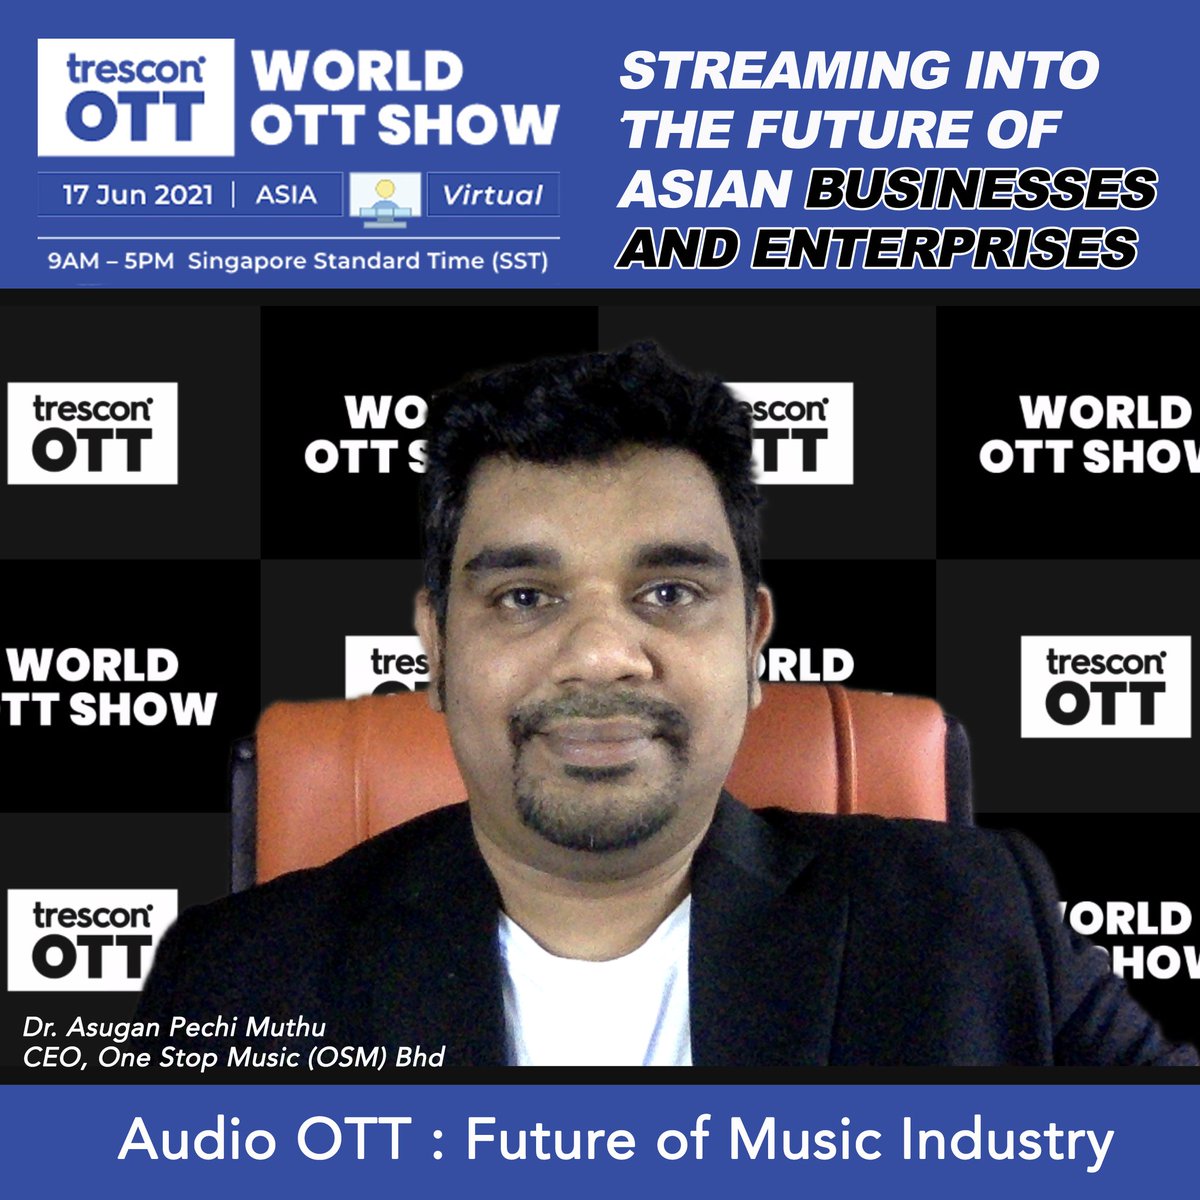 It's indeed my great pleasure participating as panel speaker earlier today at the Trescon's 'World OTT Show - Asia 2021'. TQ to the great organiser @TresconGlobal & their team.

#streaming #Trescon #OTTevents #virtual #streamingsolutions #TresconOTT #ott #musicforum #musicevent